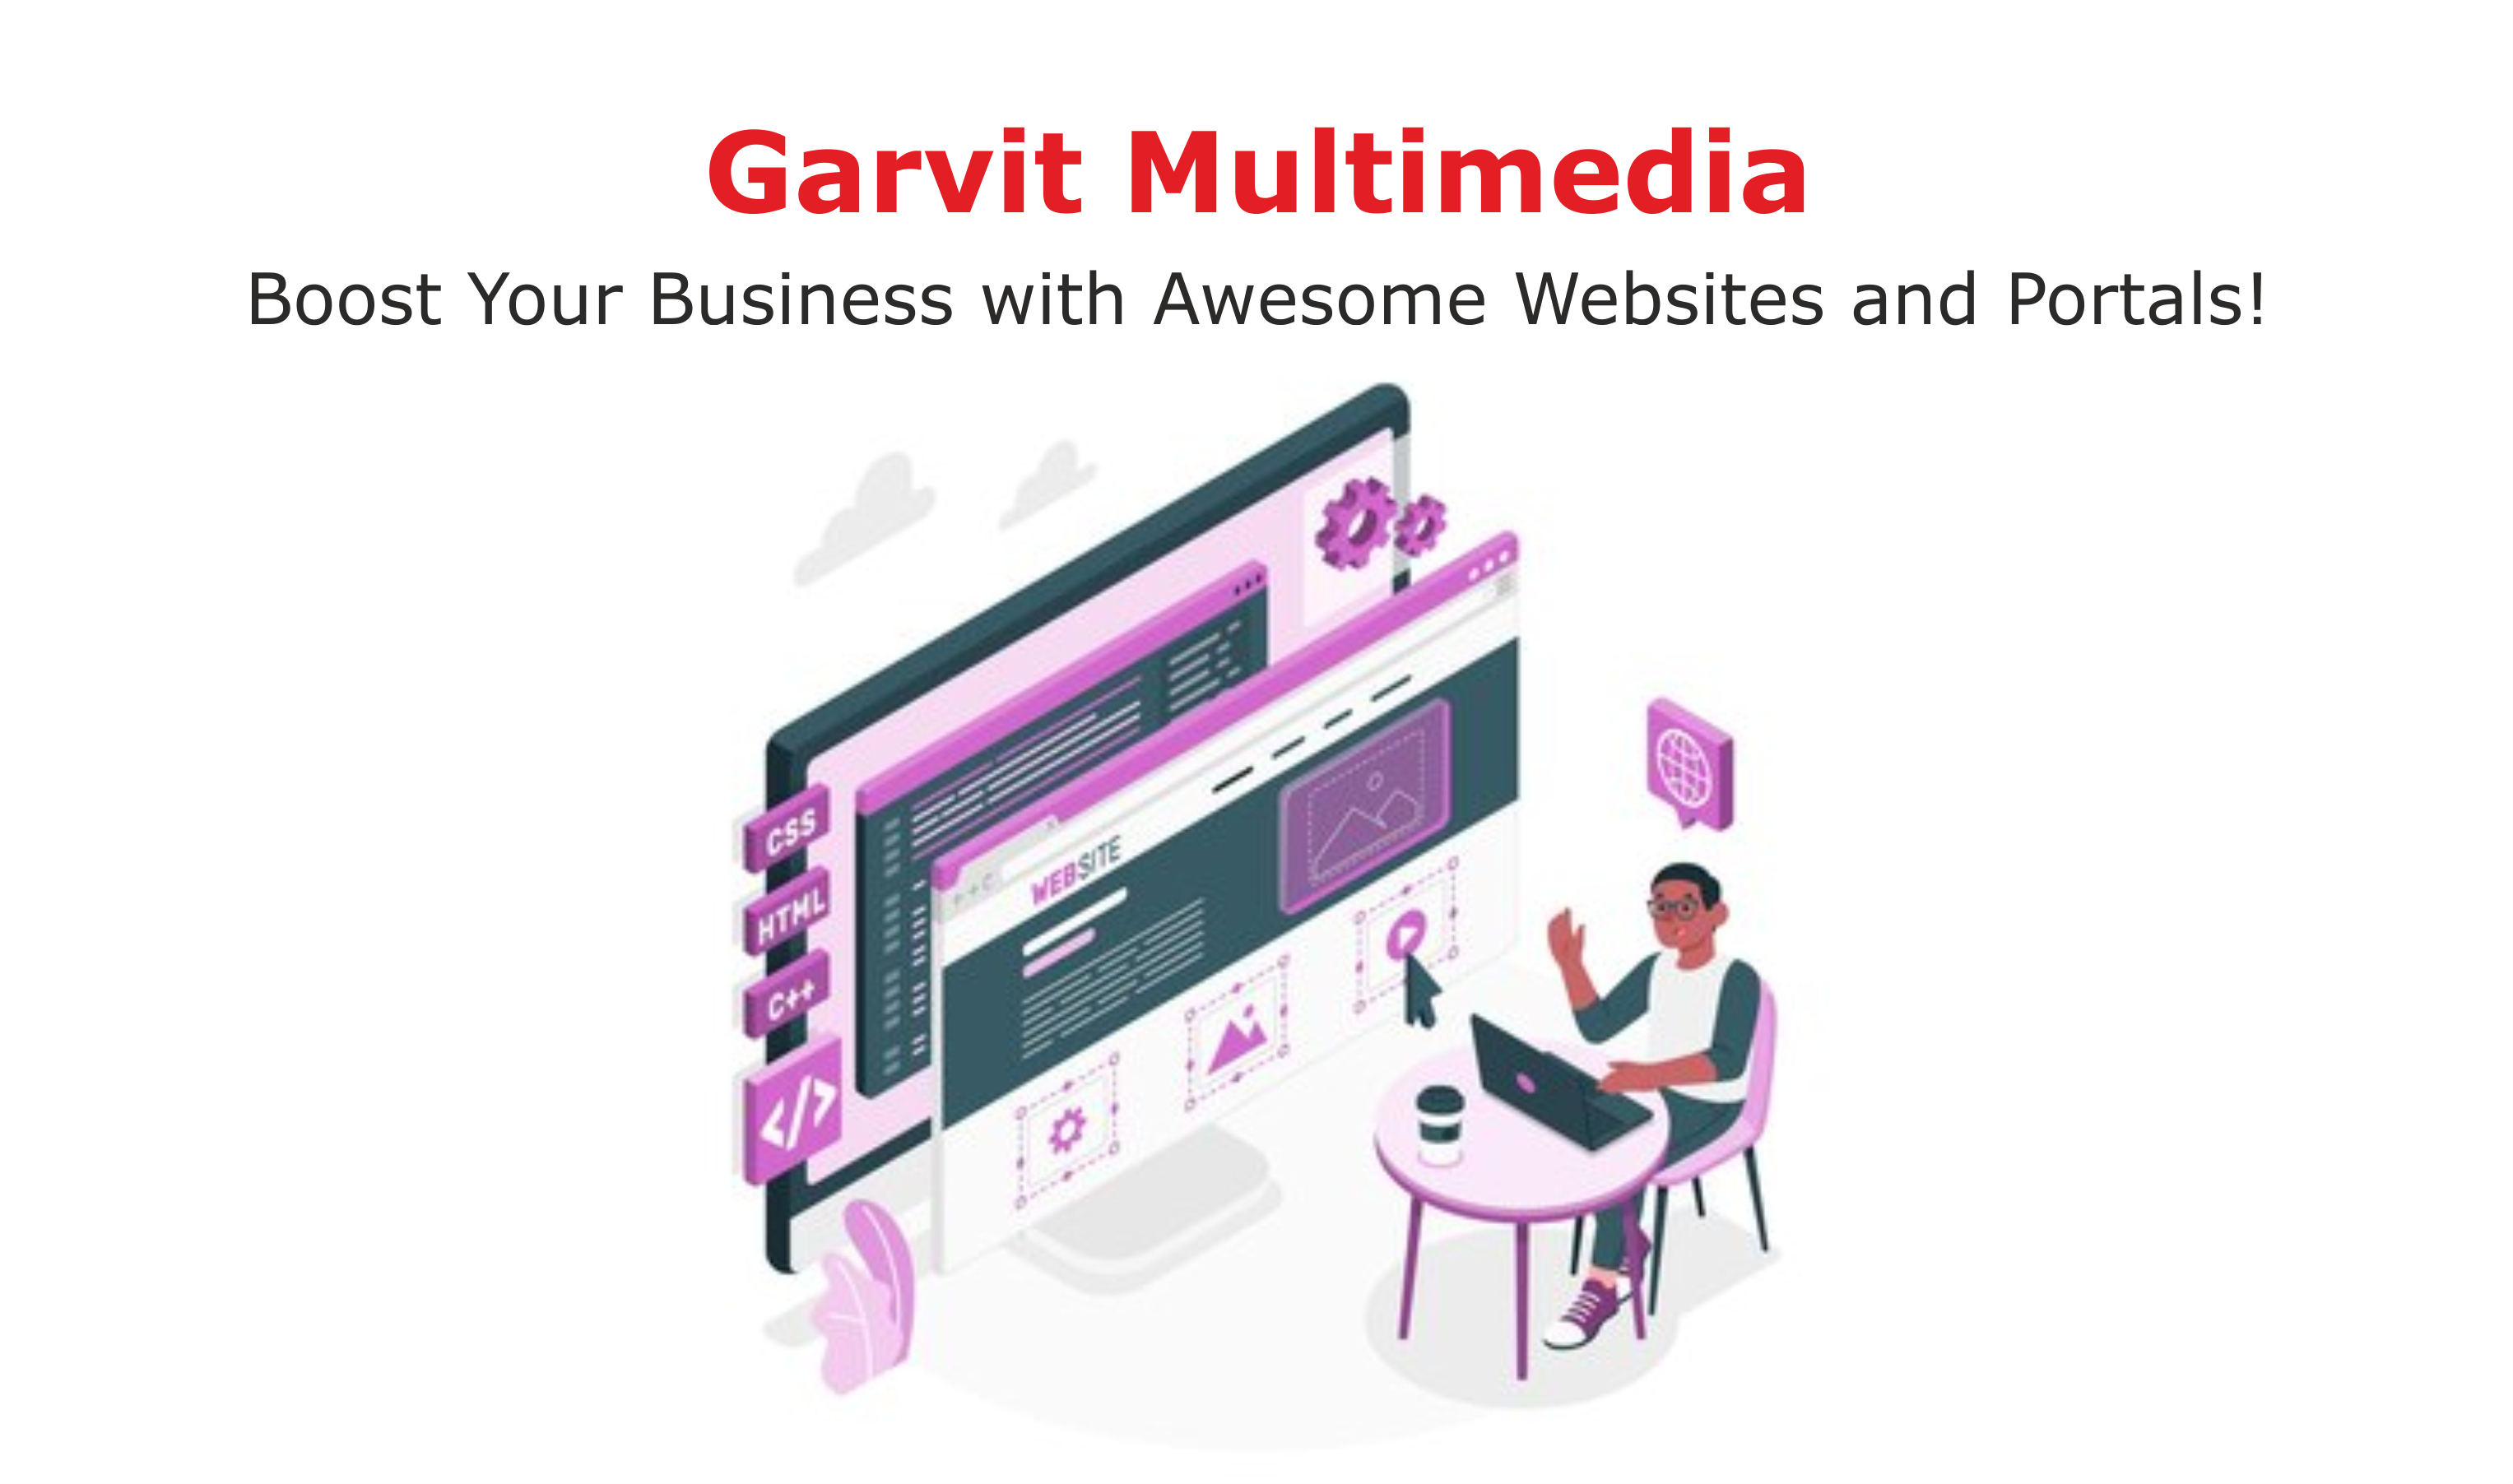 Garvit Multimedia: Boost Your Business with Awesome Websites and Portals!